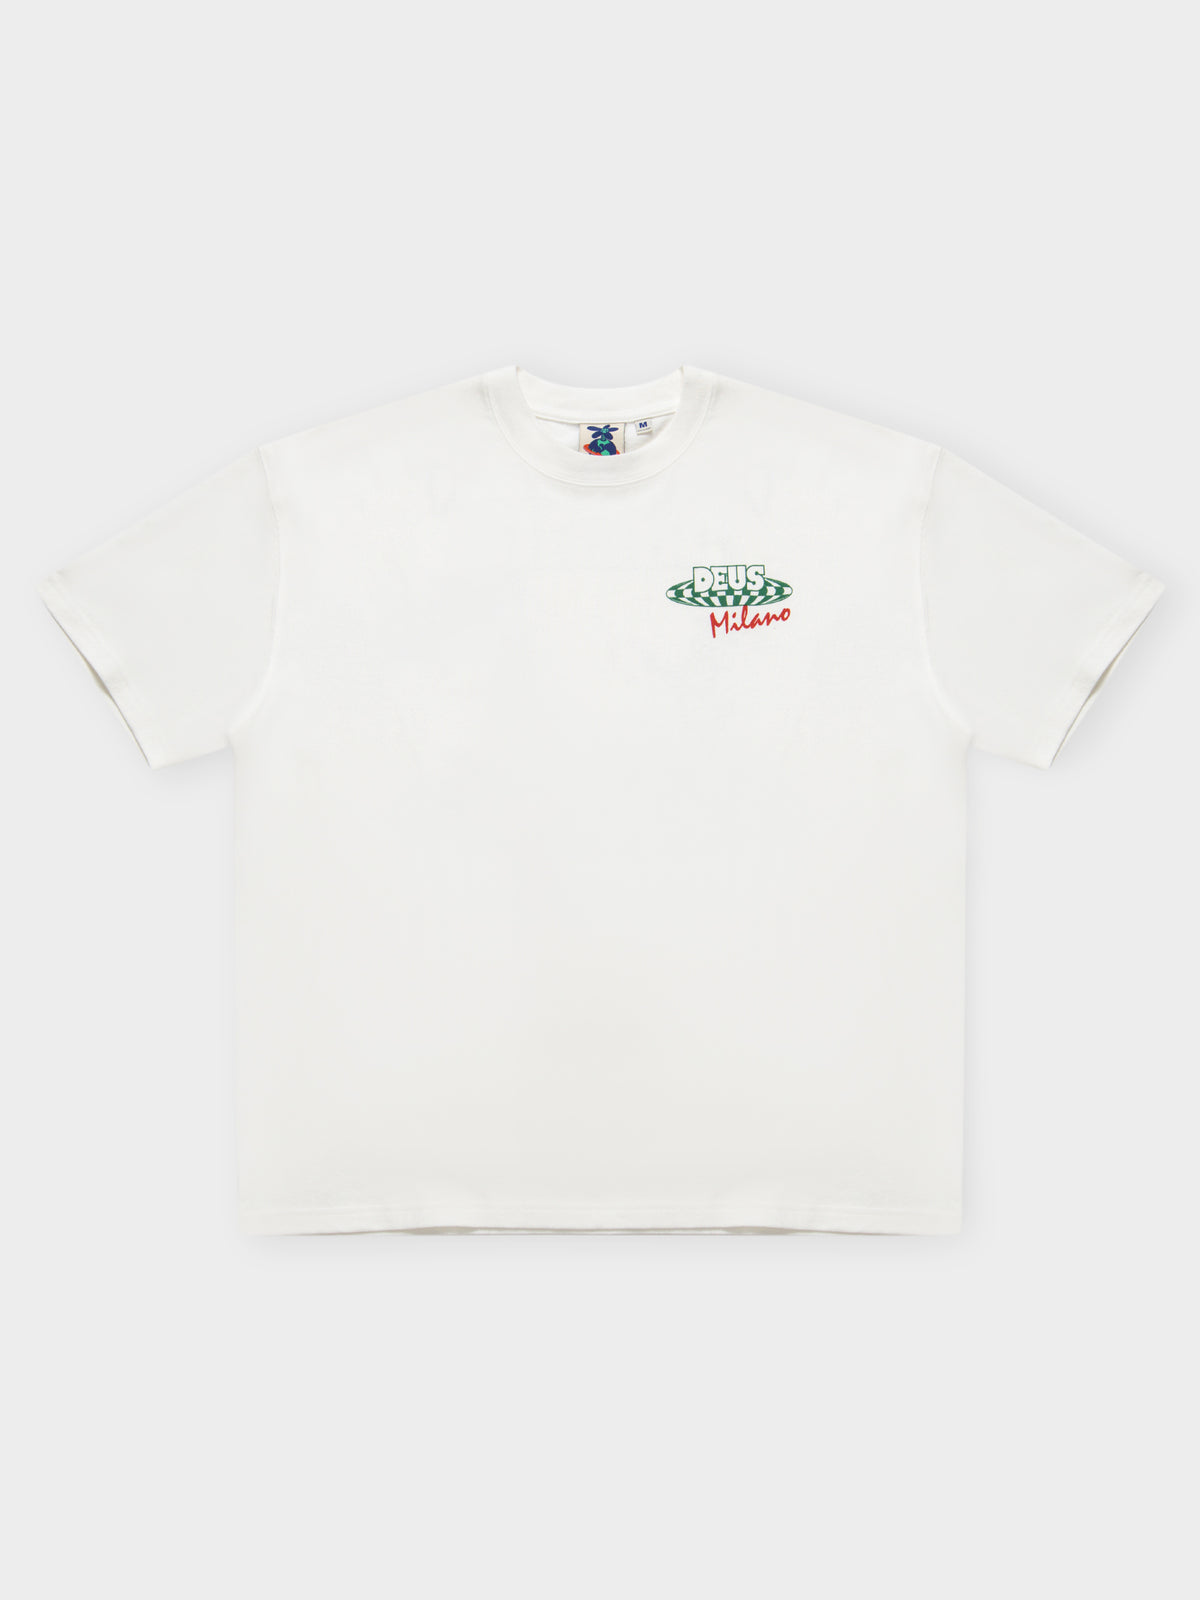 Radicale T-Shirt in White